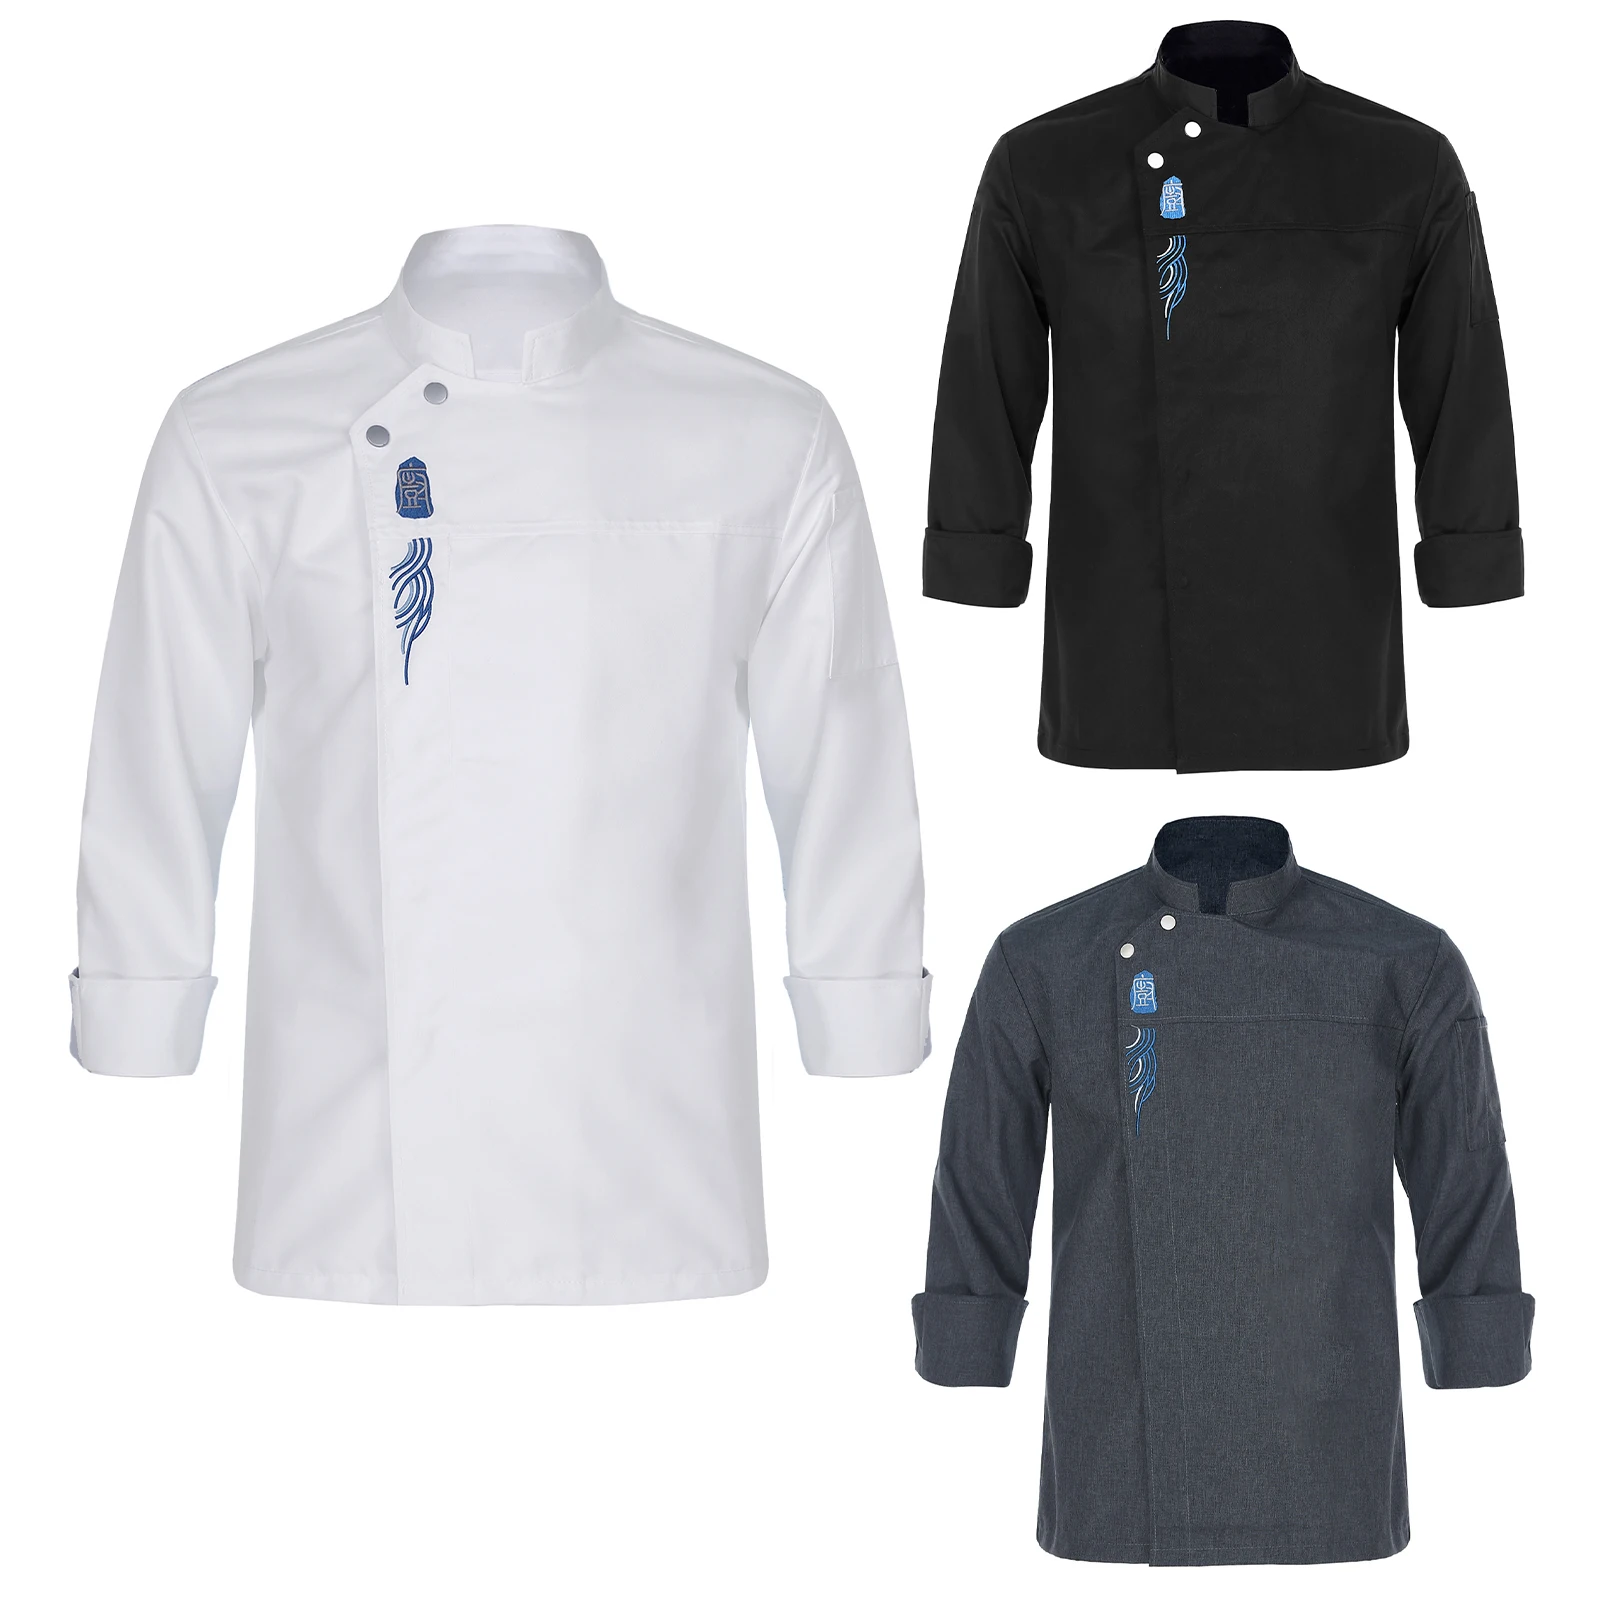 Unisex Mens Womens Embroidered Chef Jacket Stand Collar Long Sleeve Chef Coat Restaurant Kitchen Catering Hotel Uniform Top